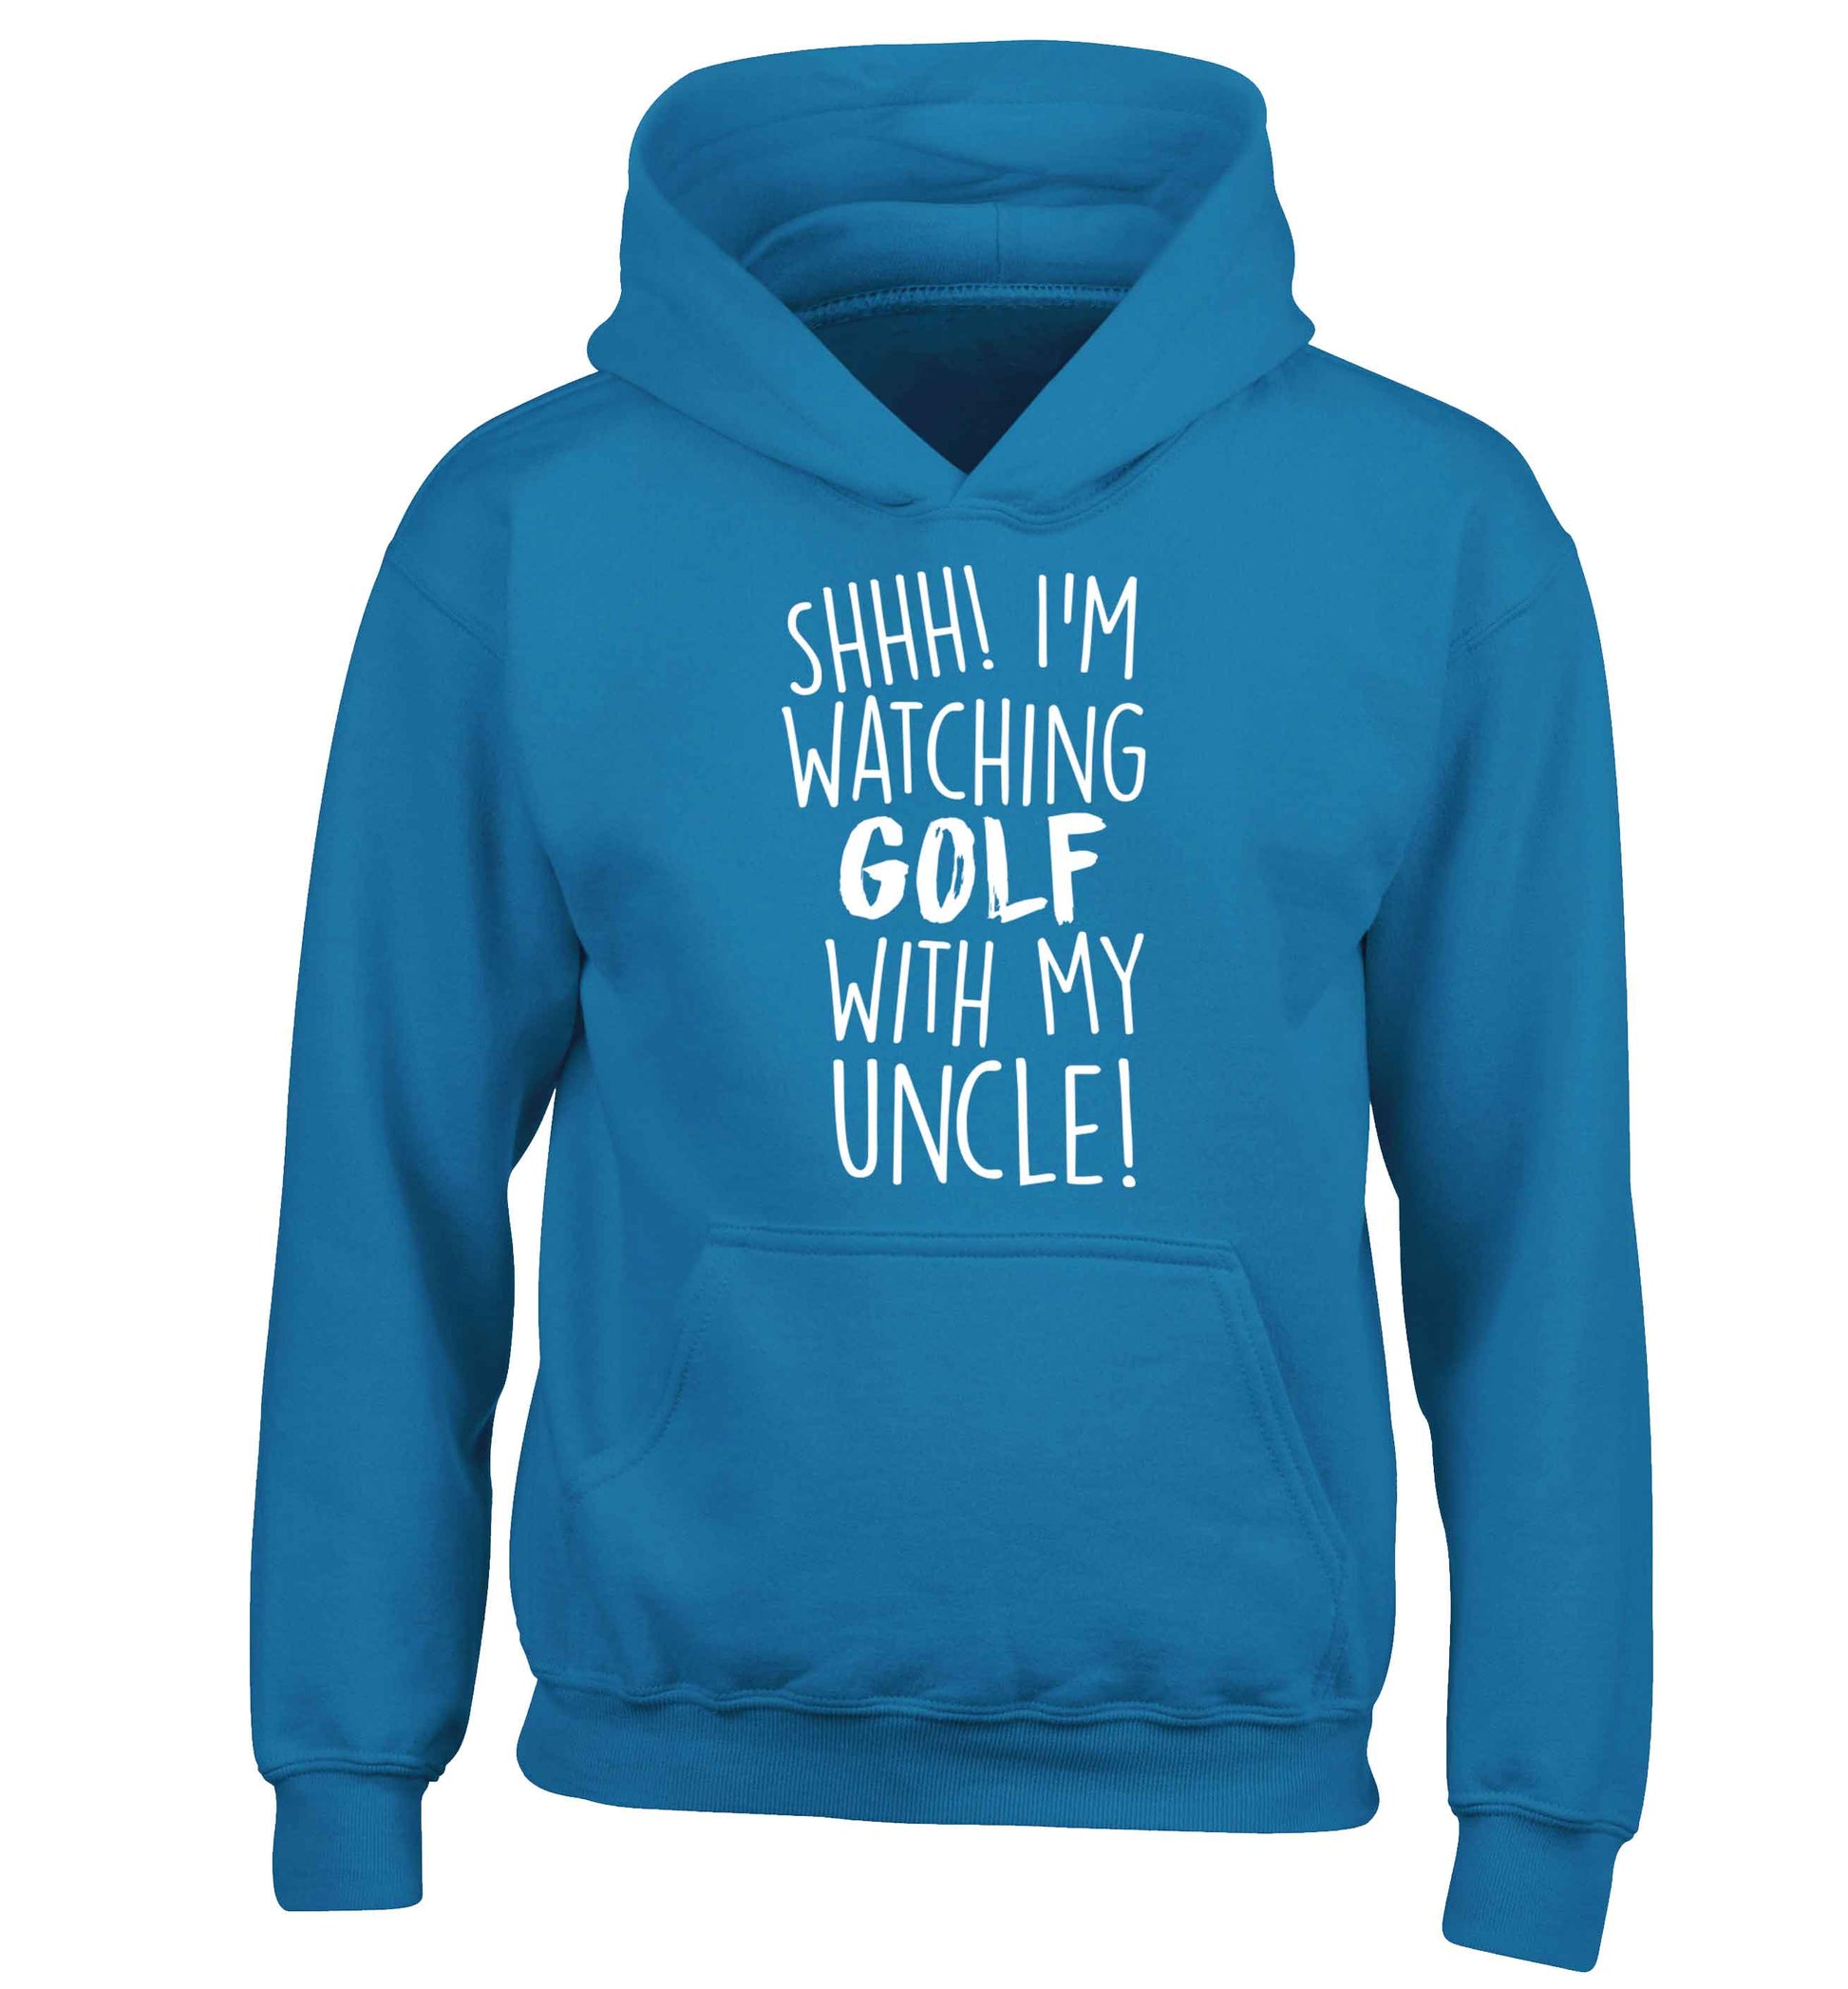 Shh I'm watching golf with my uncle children's blue hoodie 12-13 Years